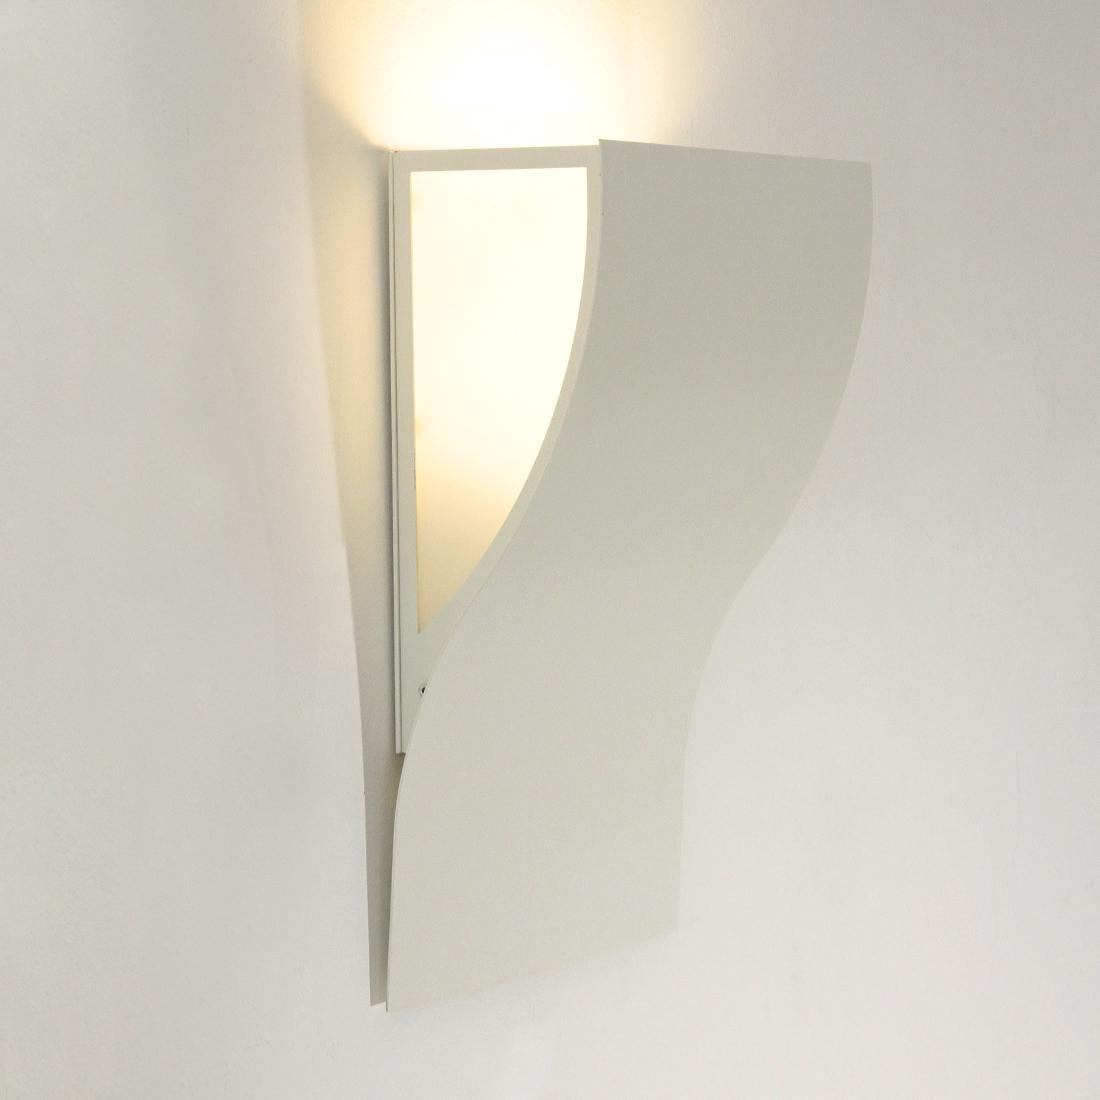 Contemporary 'Moki' wall lamp by Eugenio and Andrea Pamio for Oty Light, 2000s For Sale